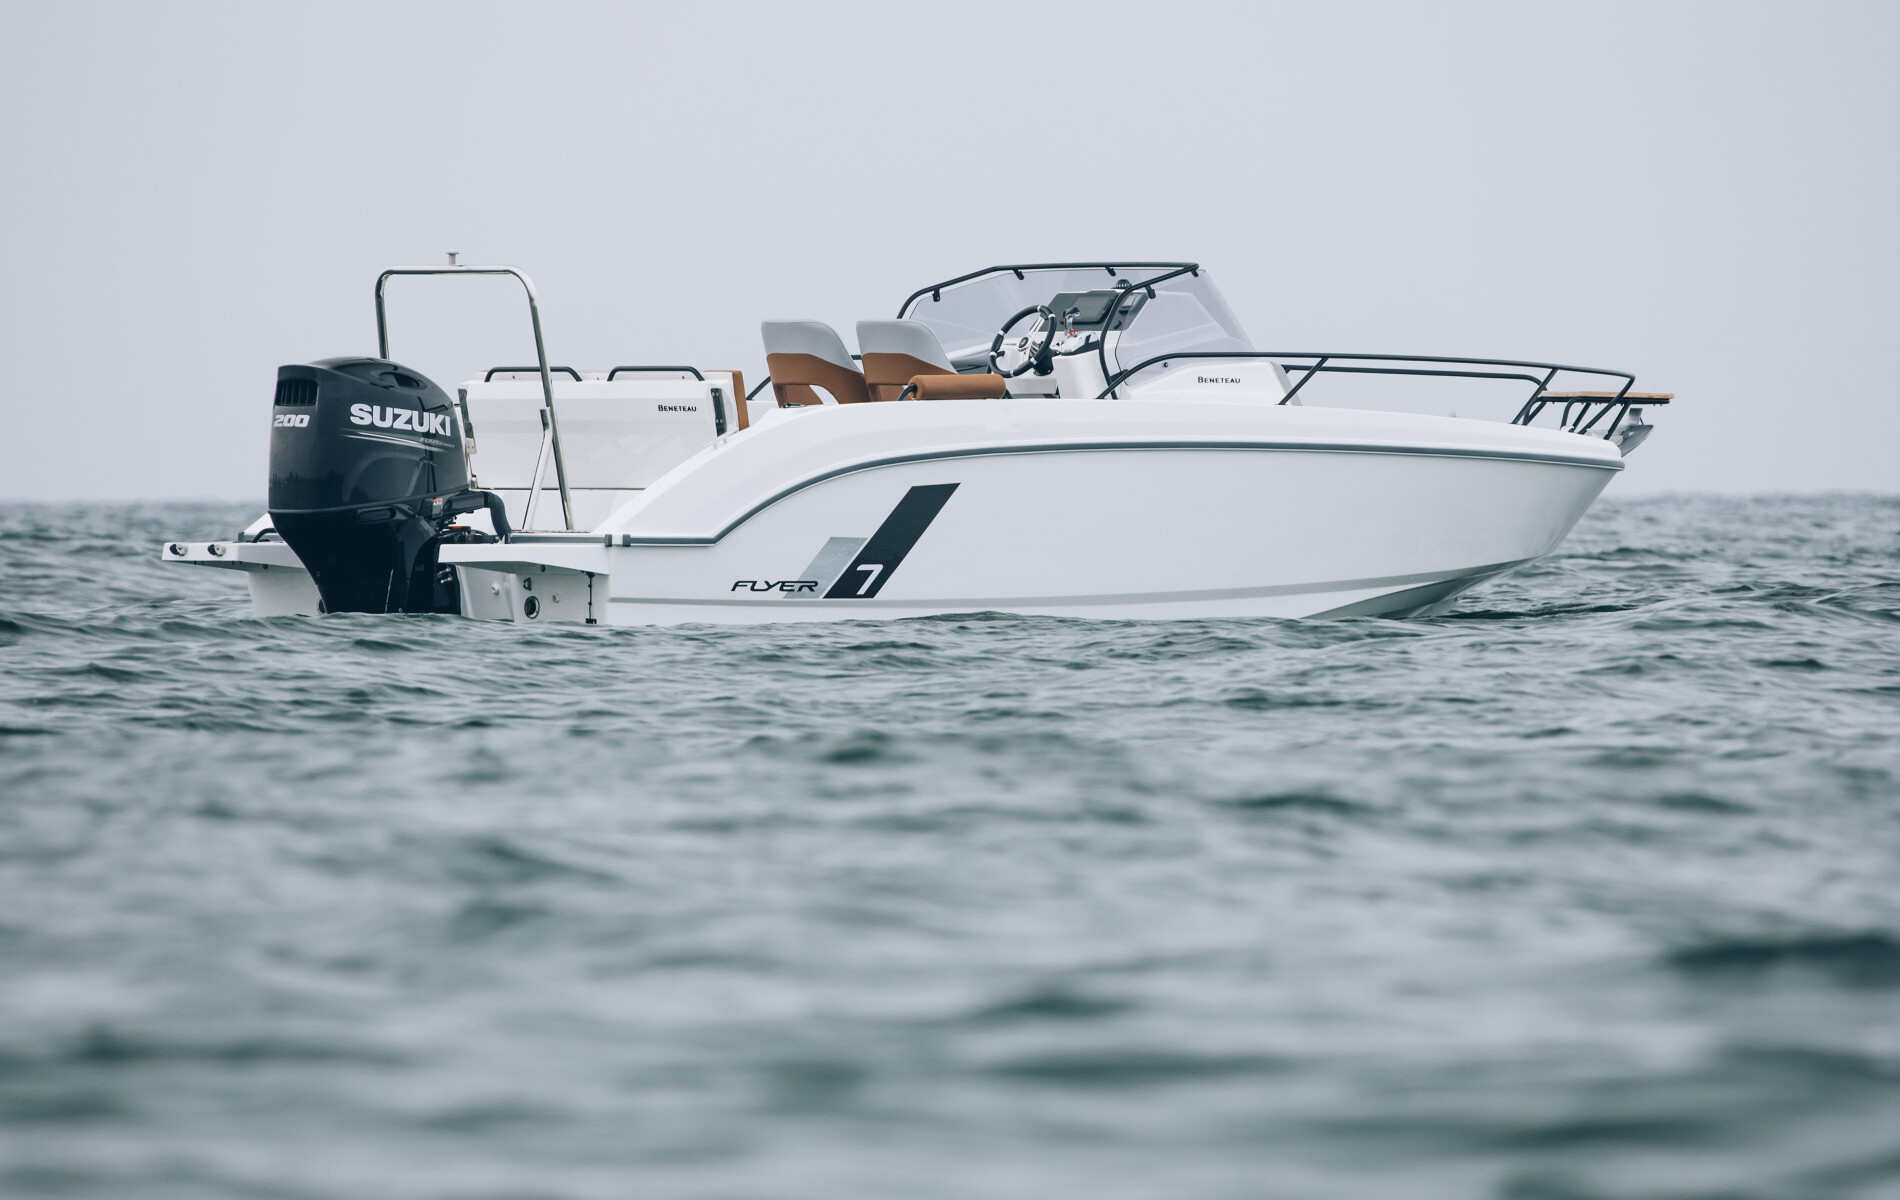 The FLYER 7 SUNdeck by Beneteau Outboard